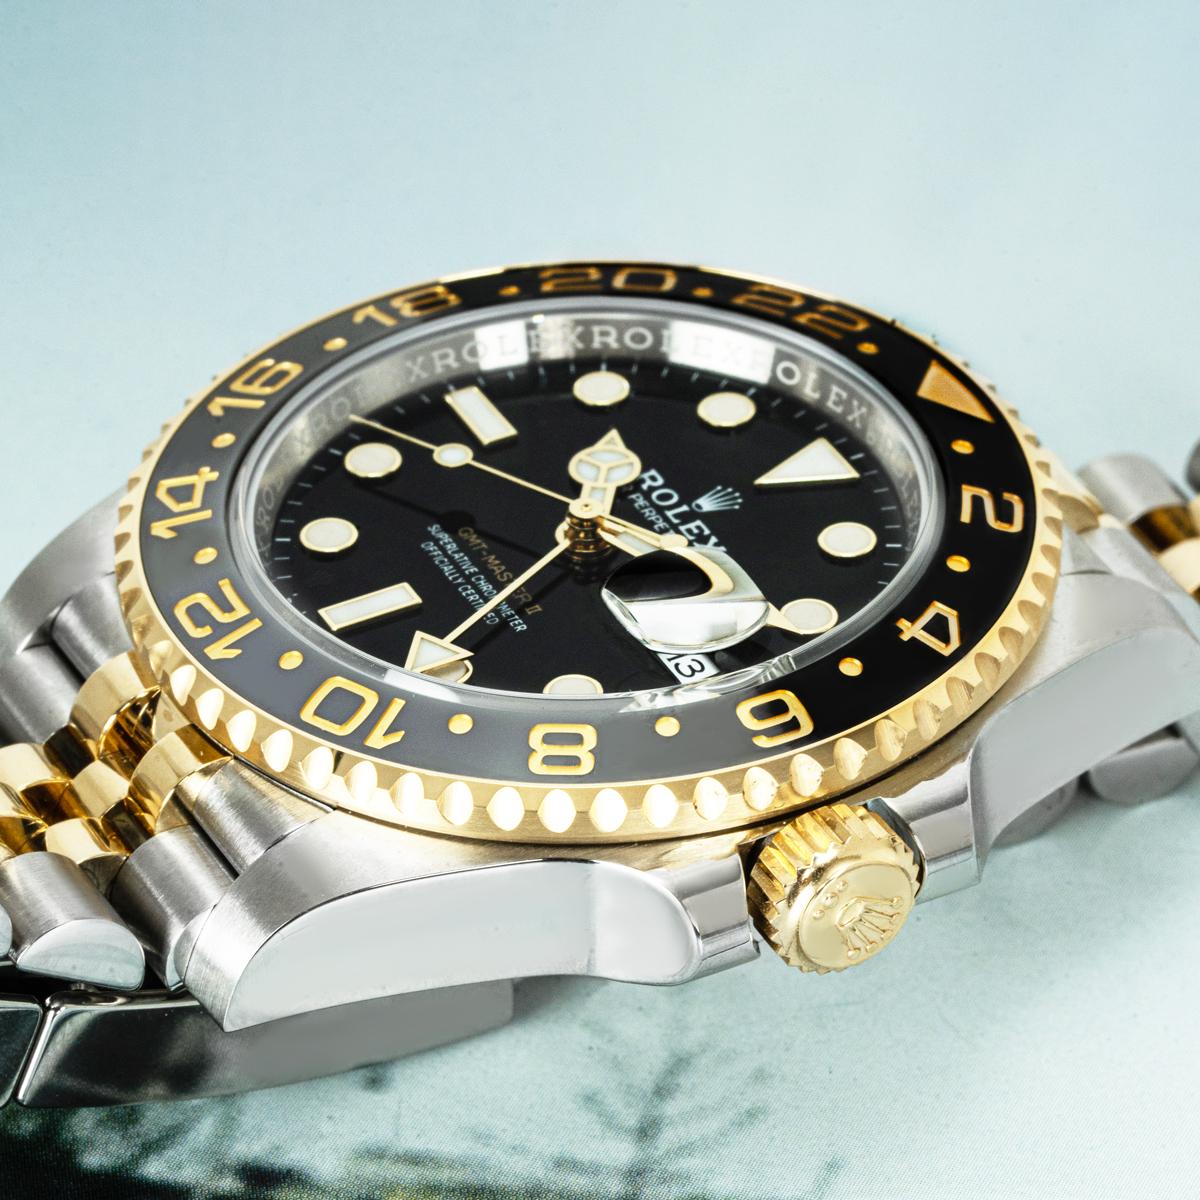 A 40mm Rolex GMT-Master in stainless steel and yellow gold. Featuring a black dial with applied hour markers and a date aperture. The watch also features a newly designed yellow gold 24-hour bi-directional rotating bezel with a black and grey